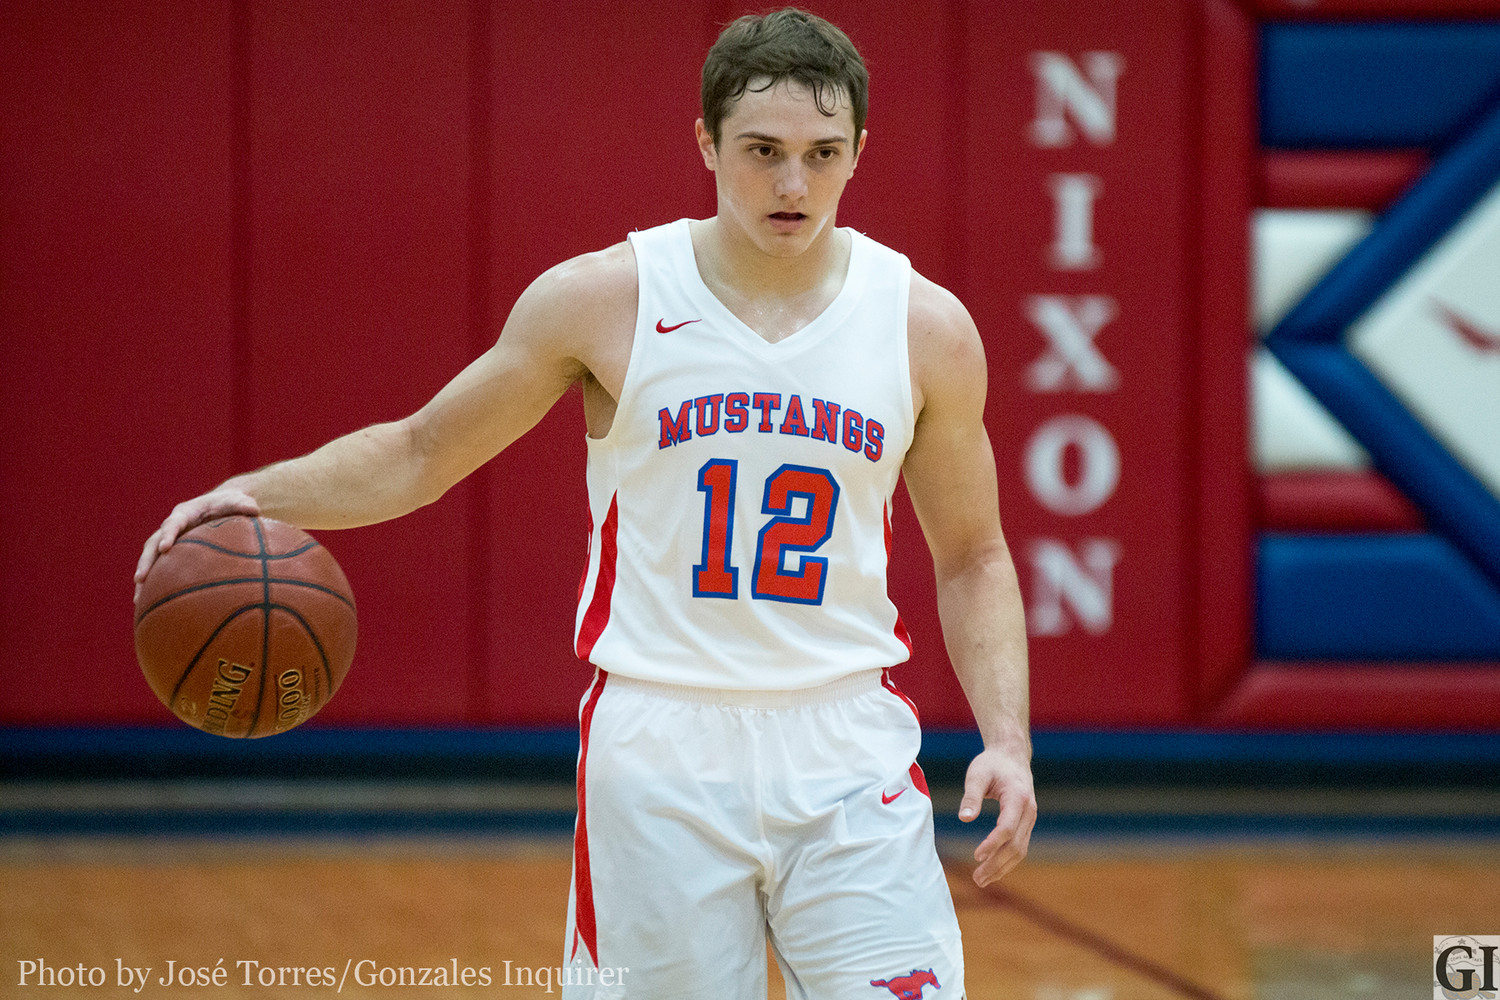 Colby Newman (12) dribbles out past half court. He came away with 12 points in the Mustangs’ 55-46 loss.